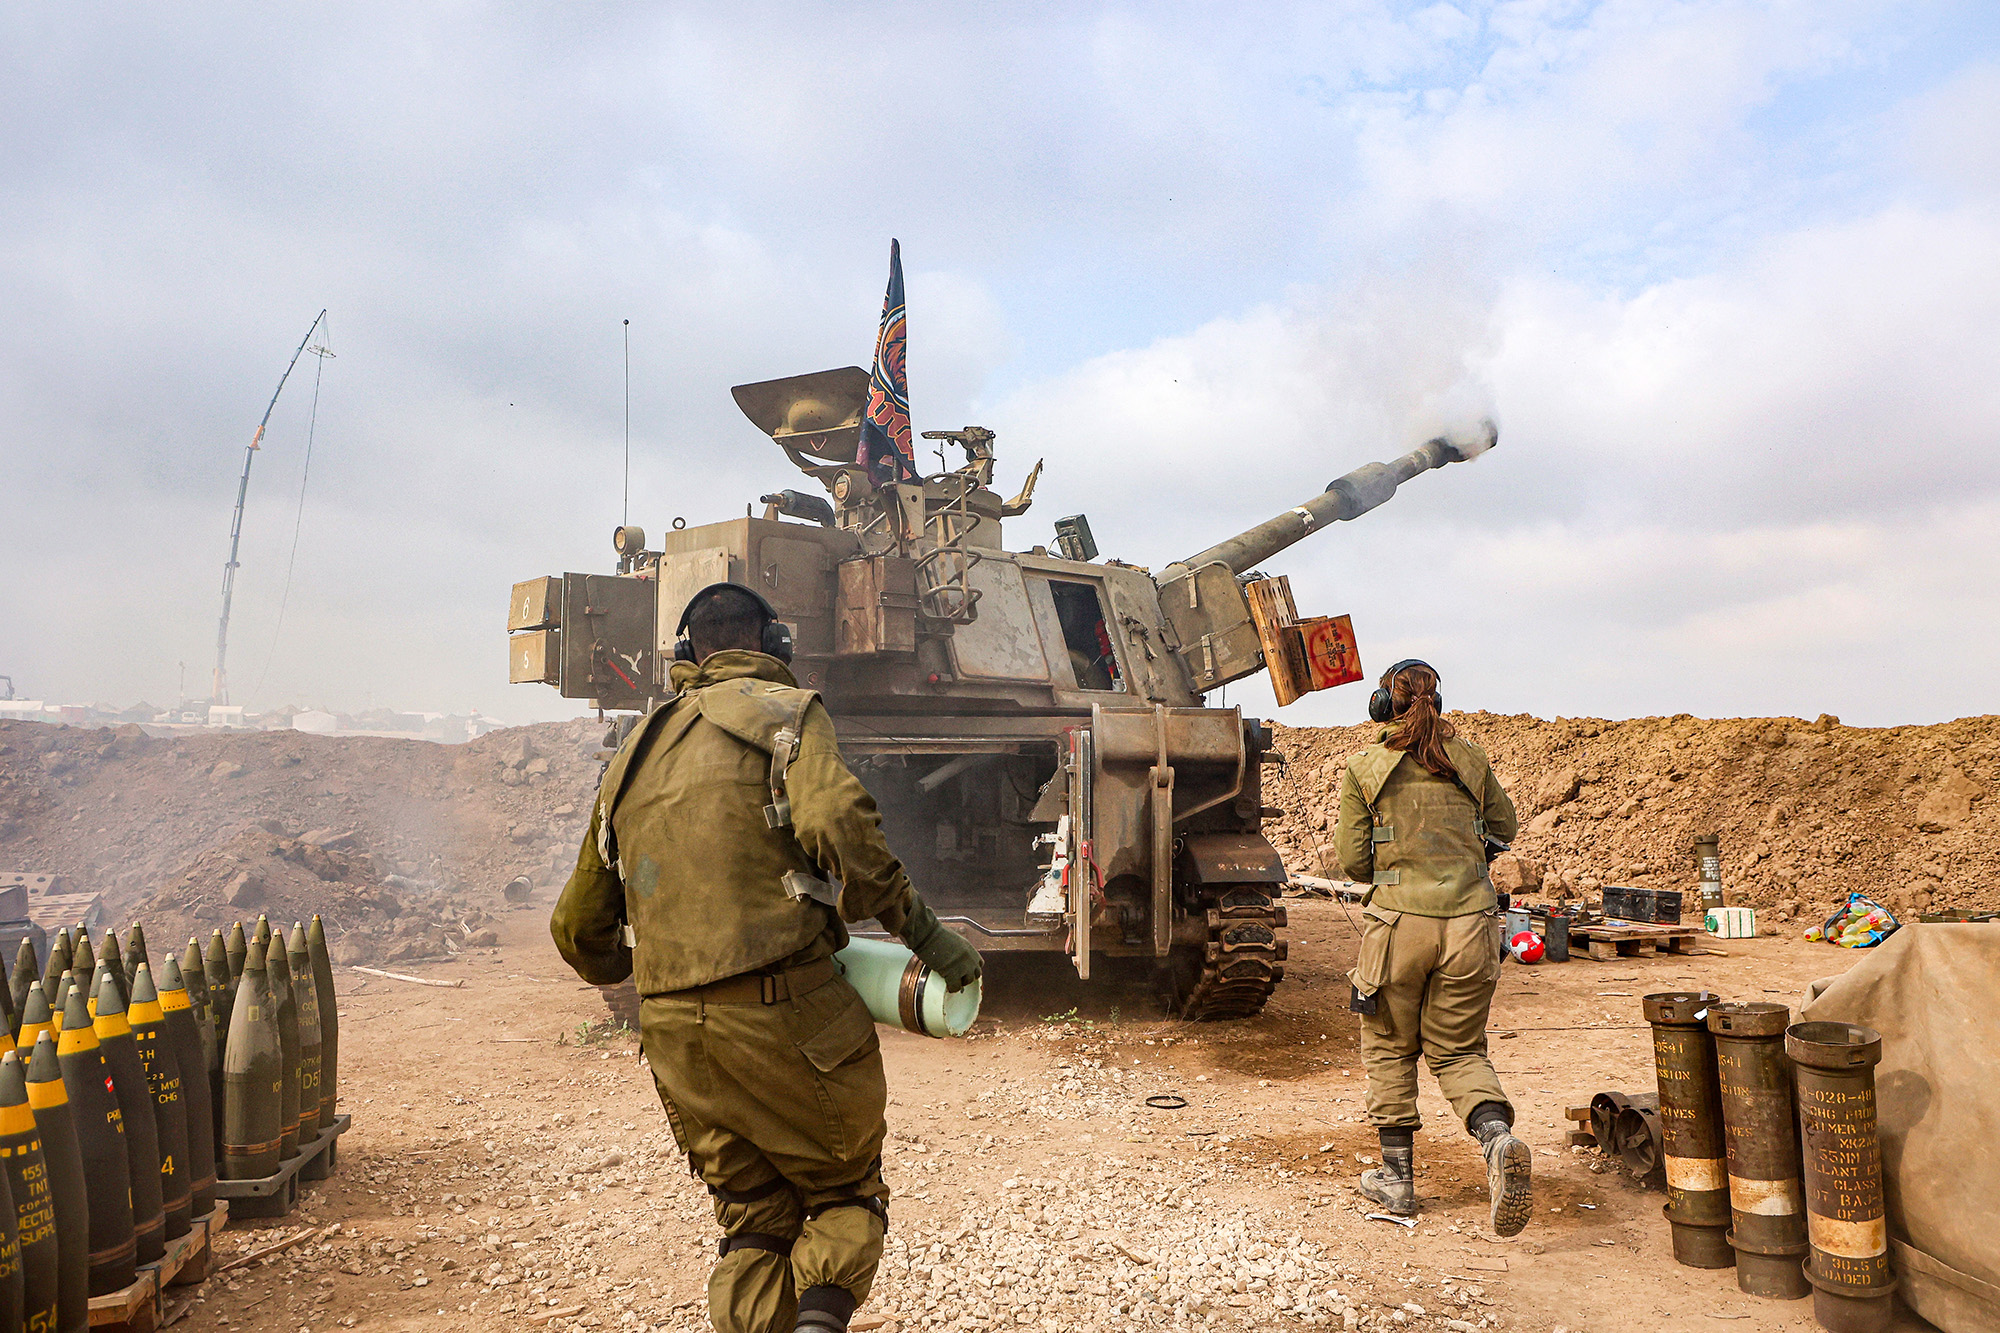 An Israeli artillery unit is pictured firing near the border with Gaza on December 5.